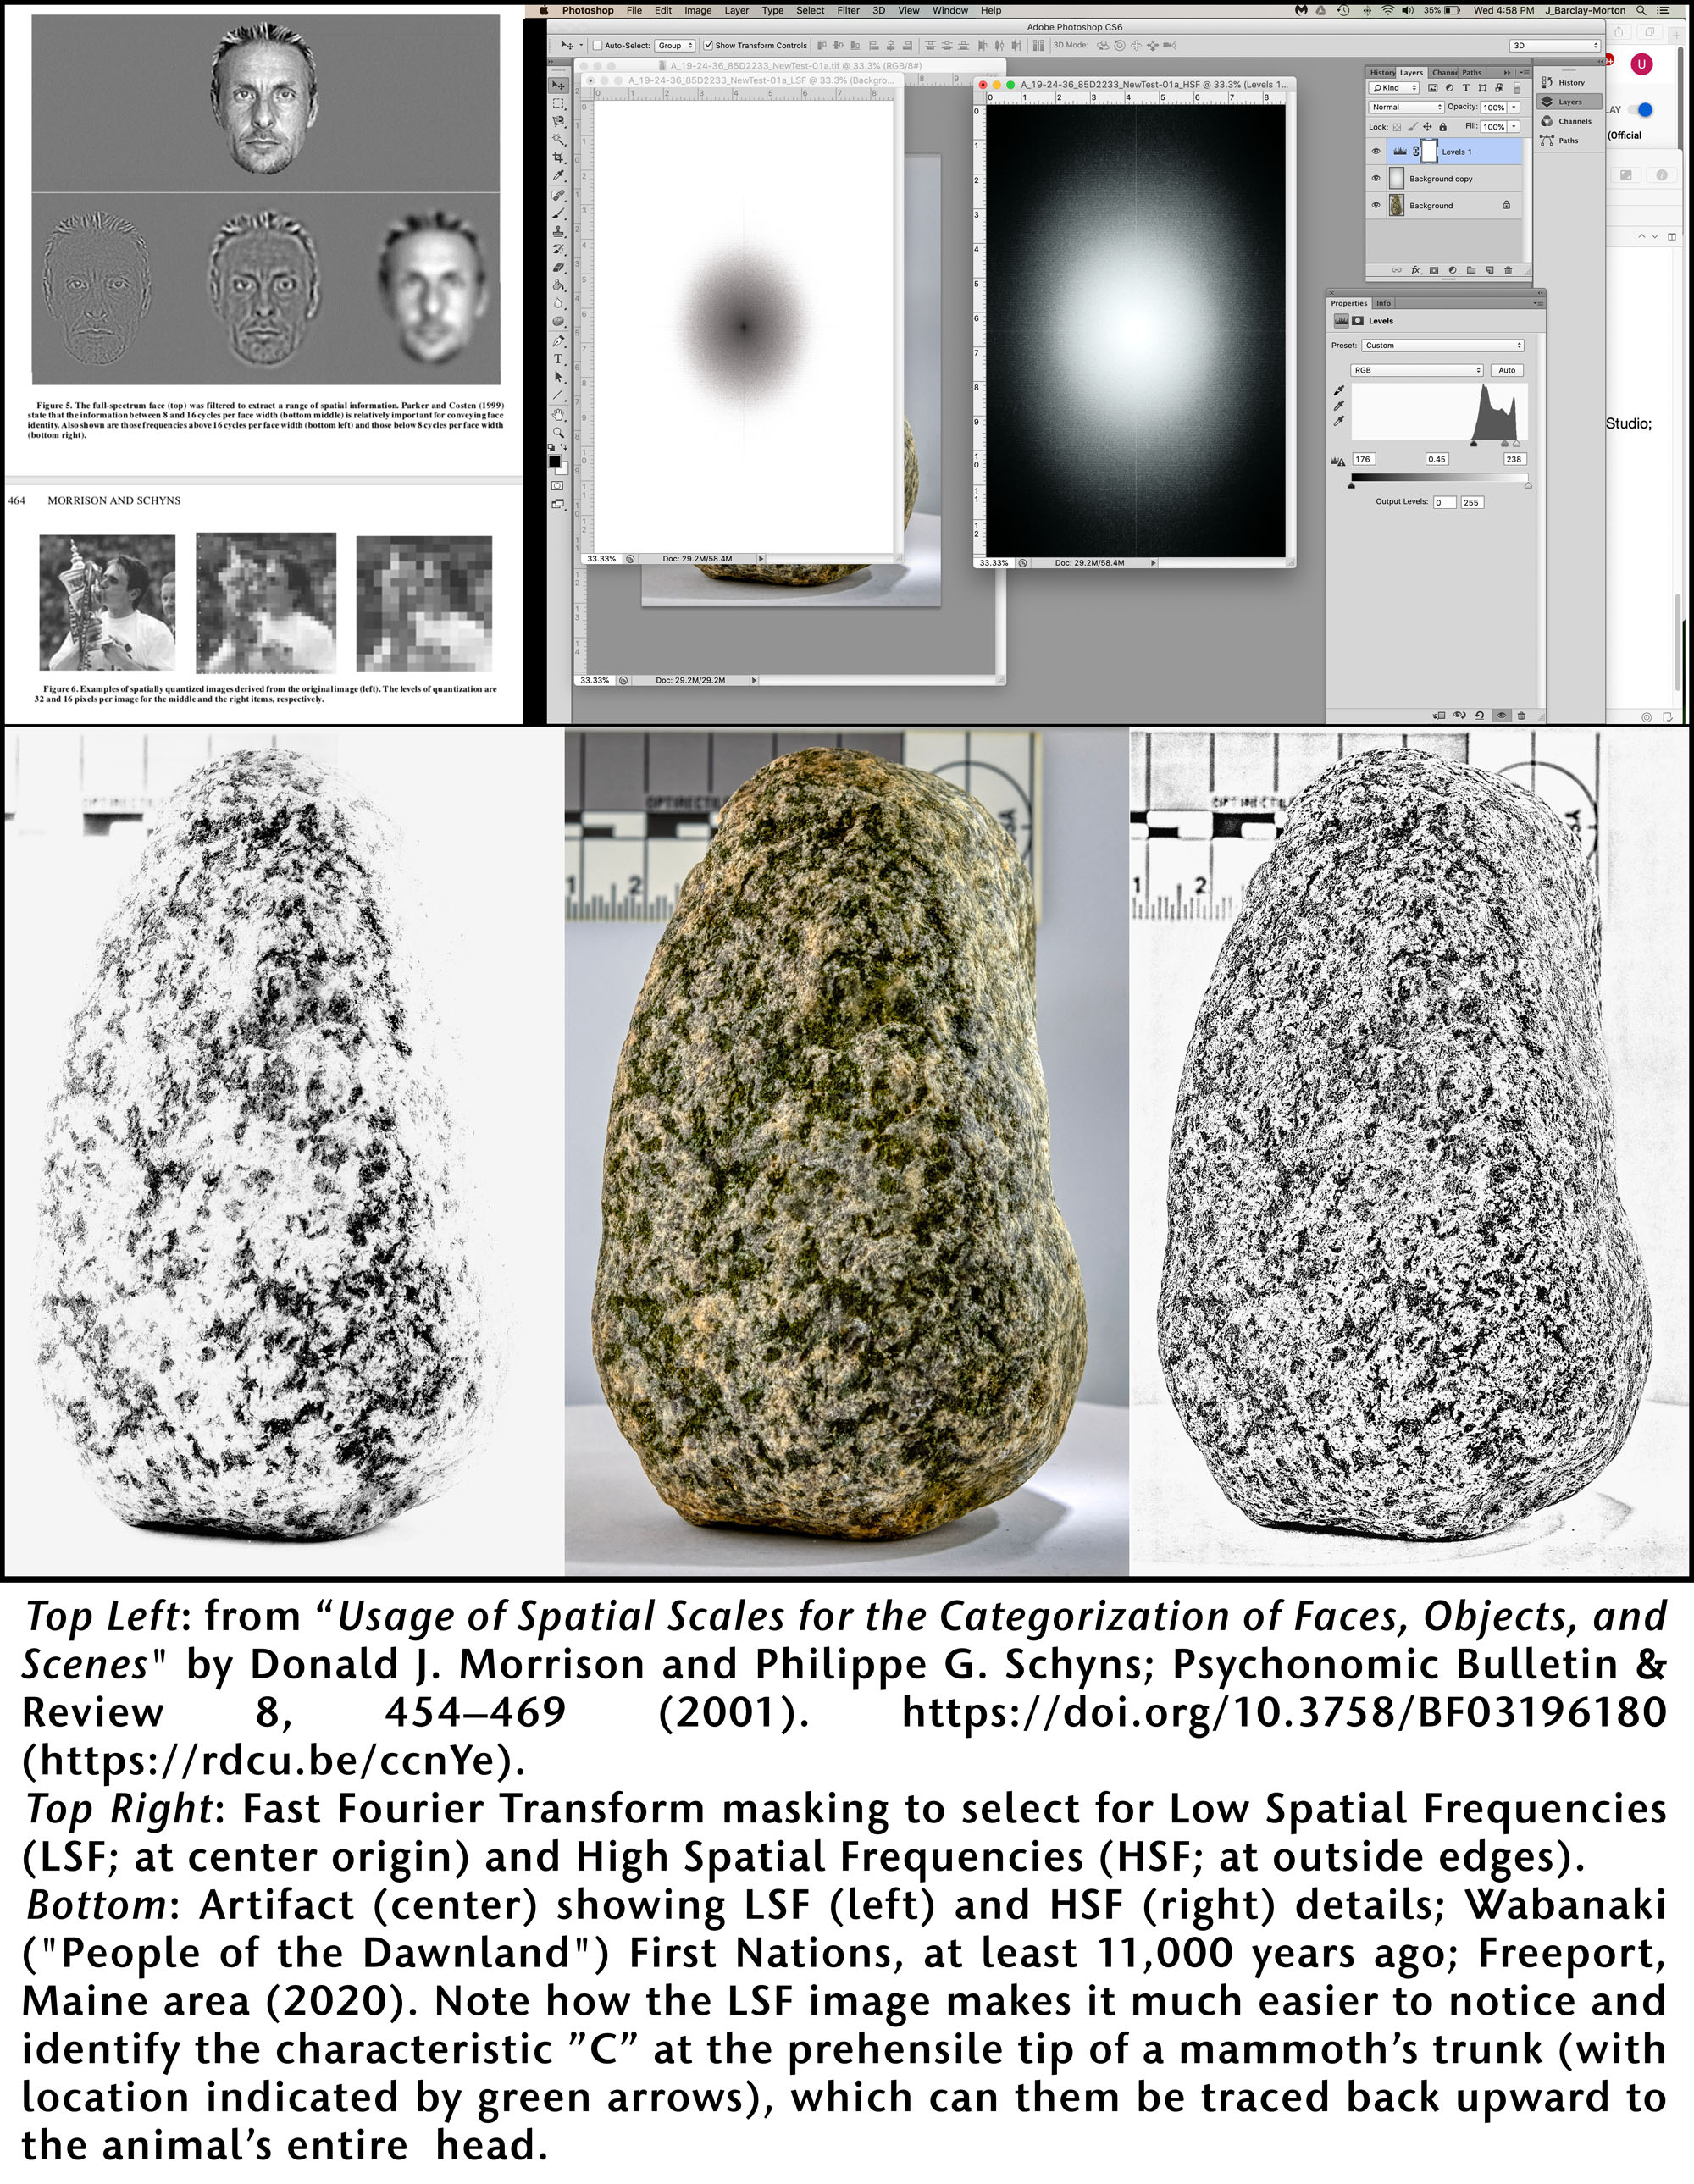 procedural methodology for distinguishing image areas using spatial frequencies reveals the image of a mammoth